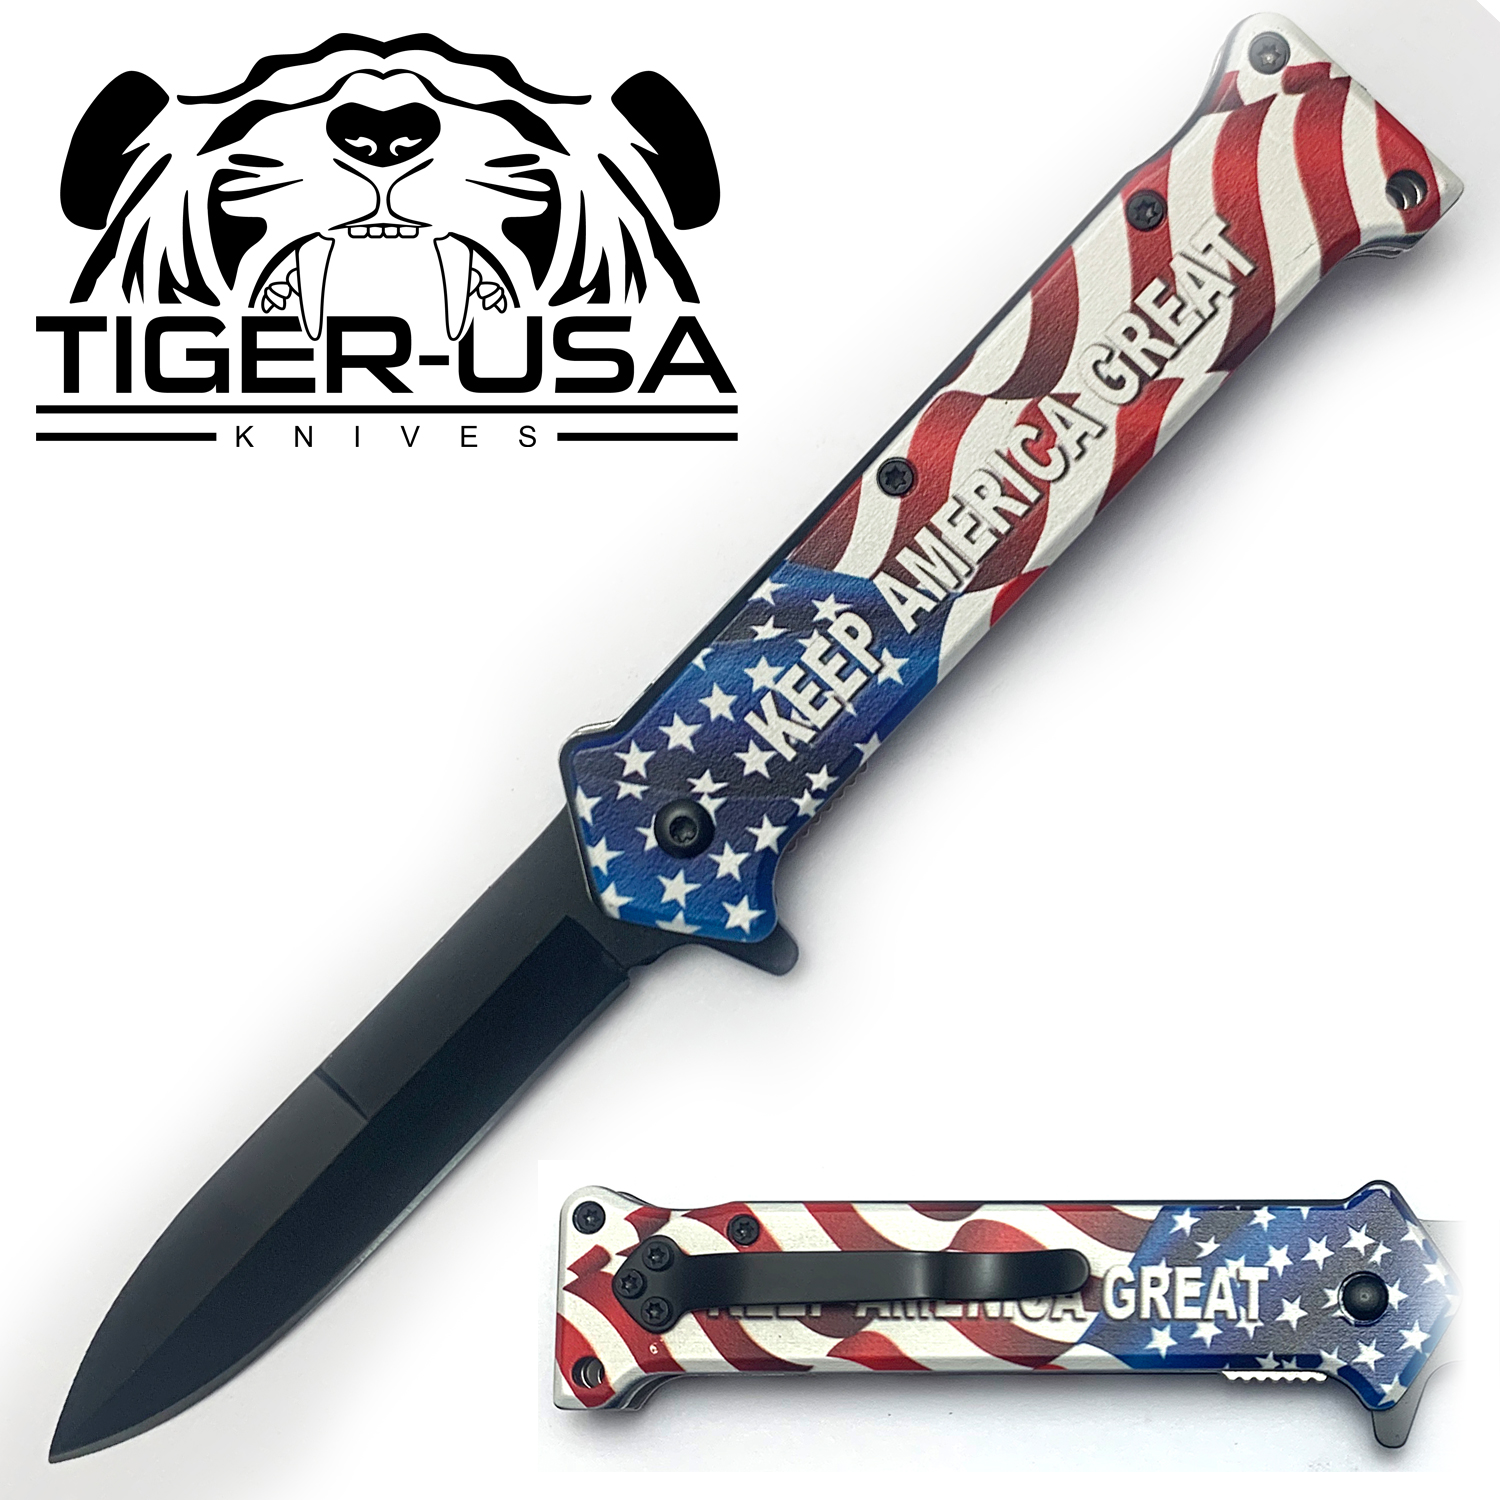 Tiger USA Spring Assisted Knife Keep America Great Joker